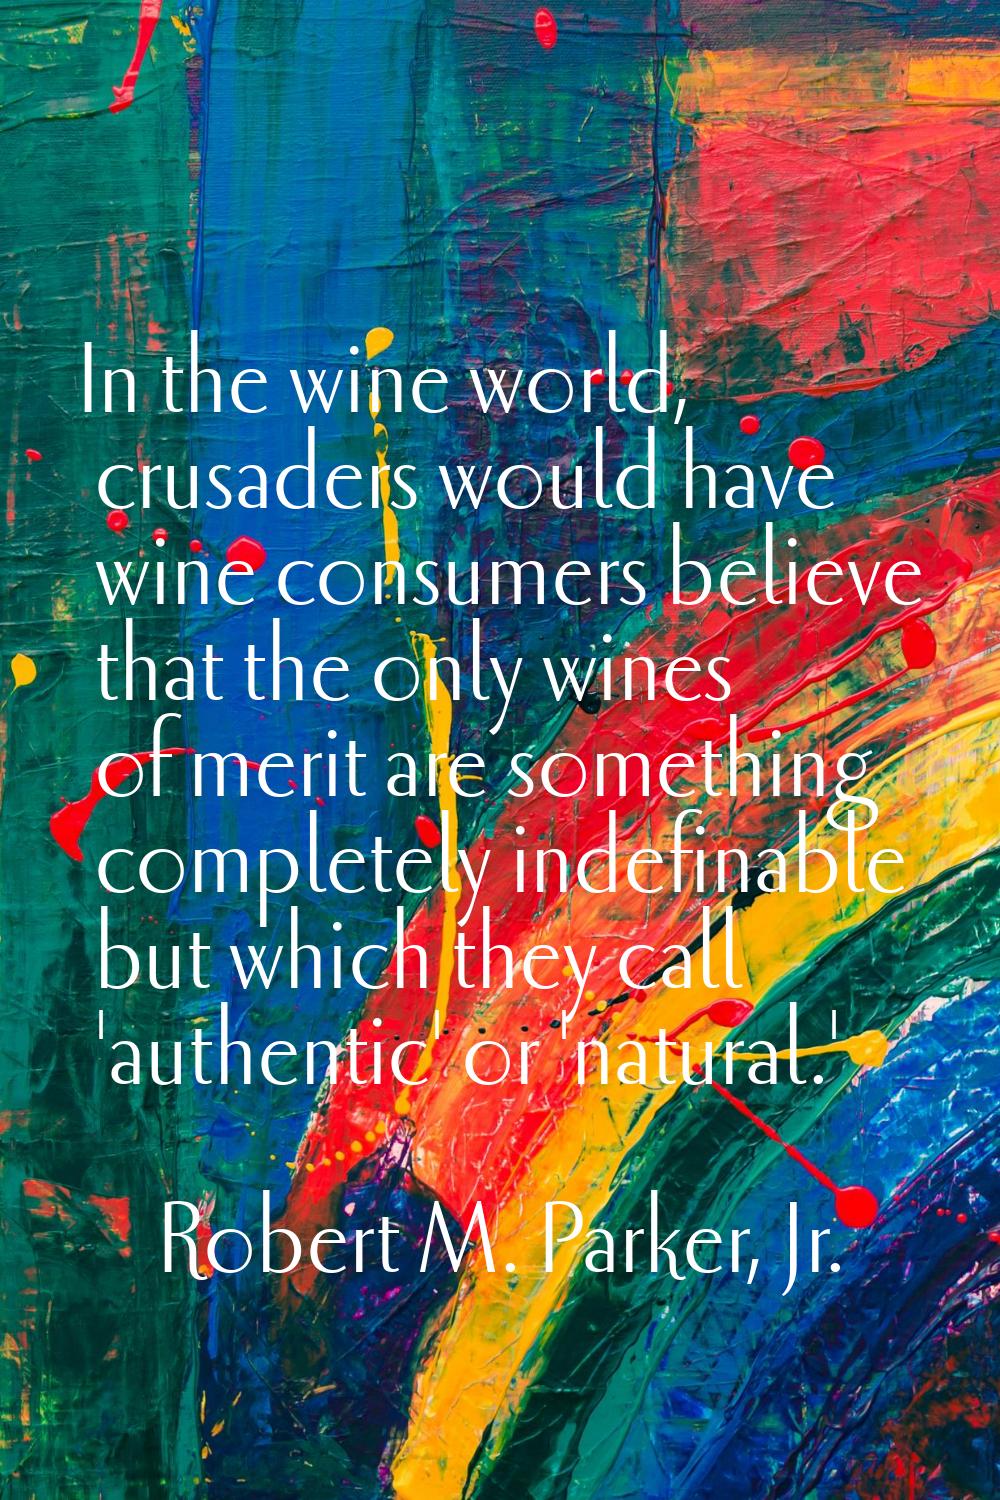 In the wine world, crusaders would have wine consumers believe that the only wines of merit are som